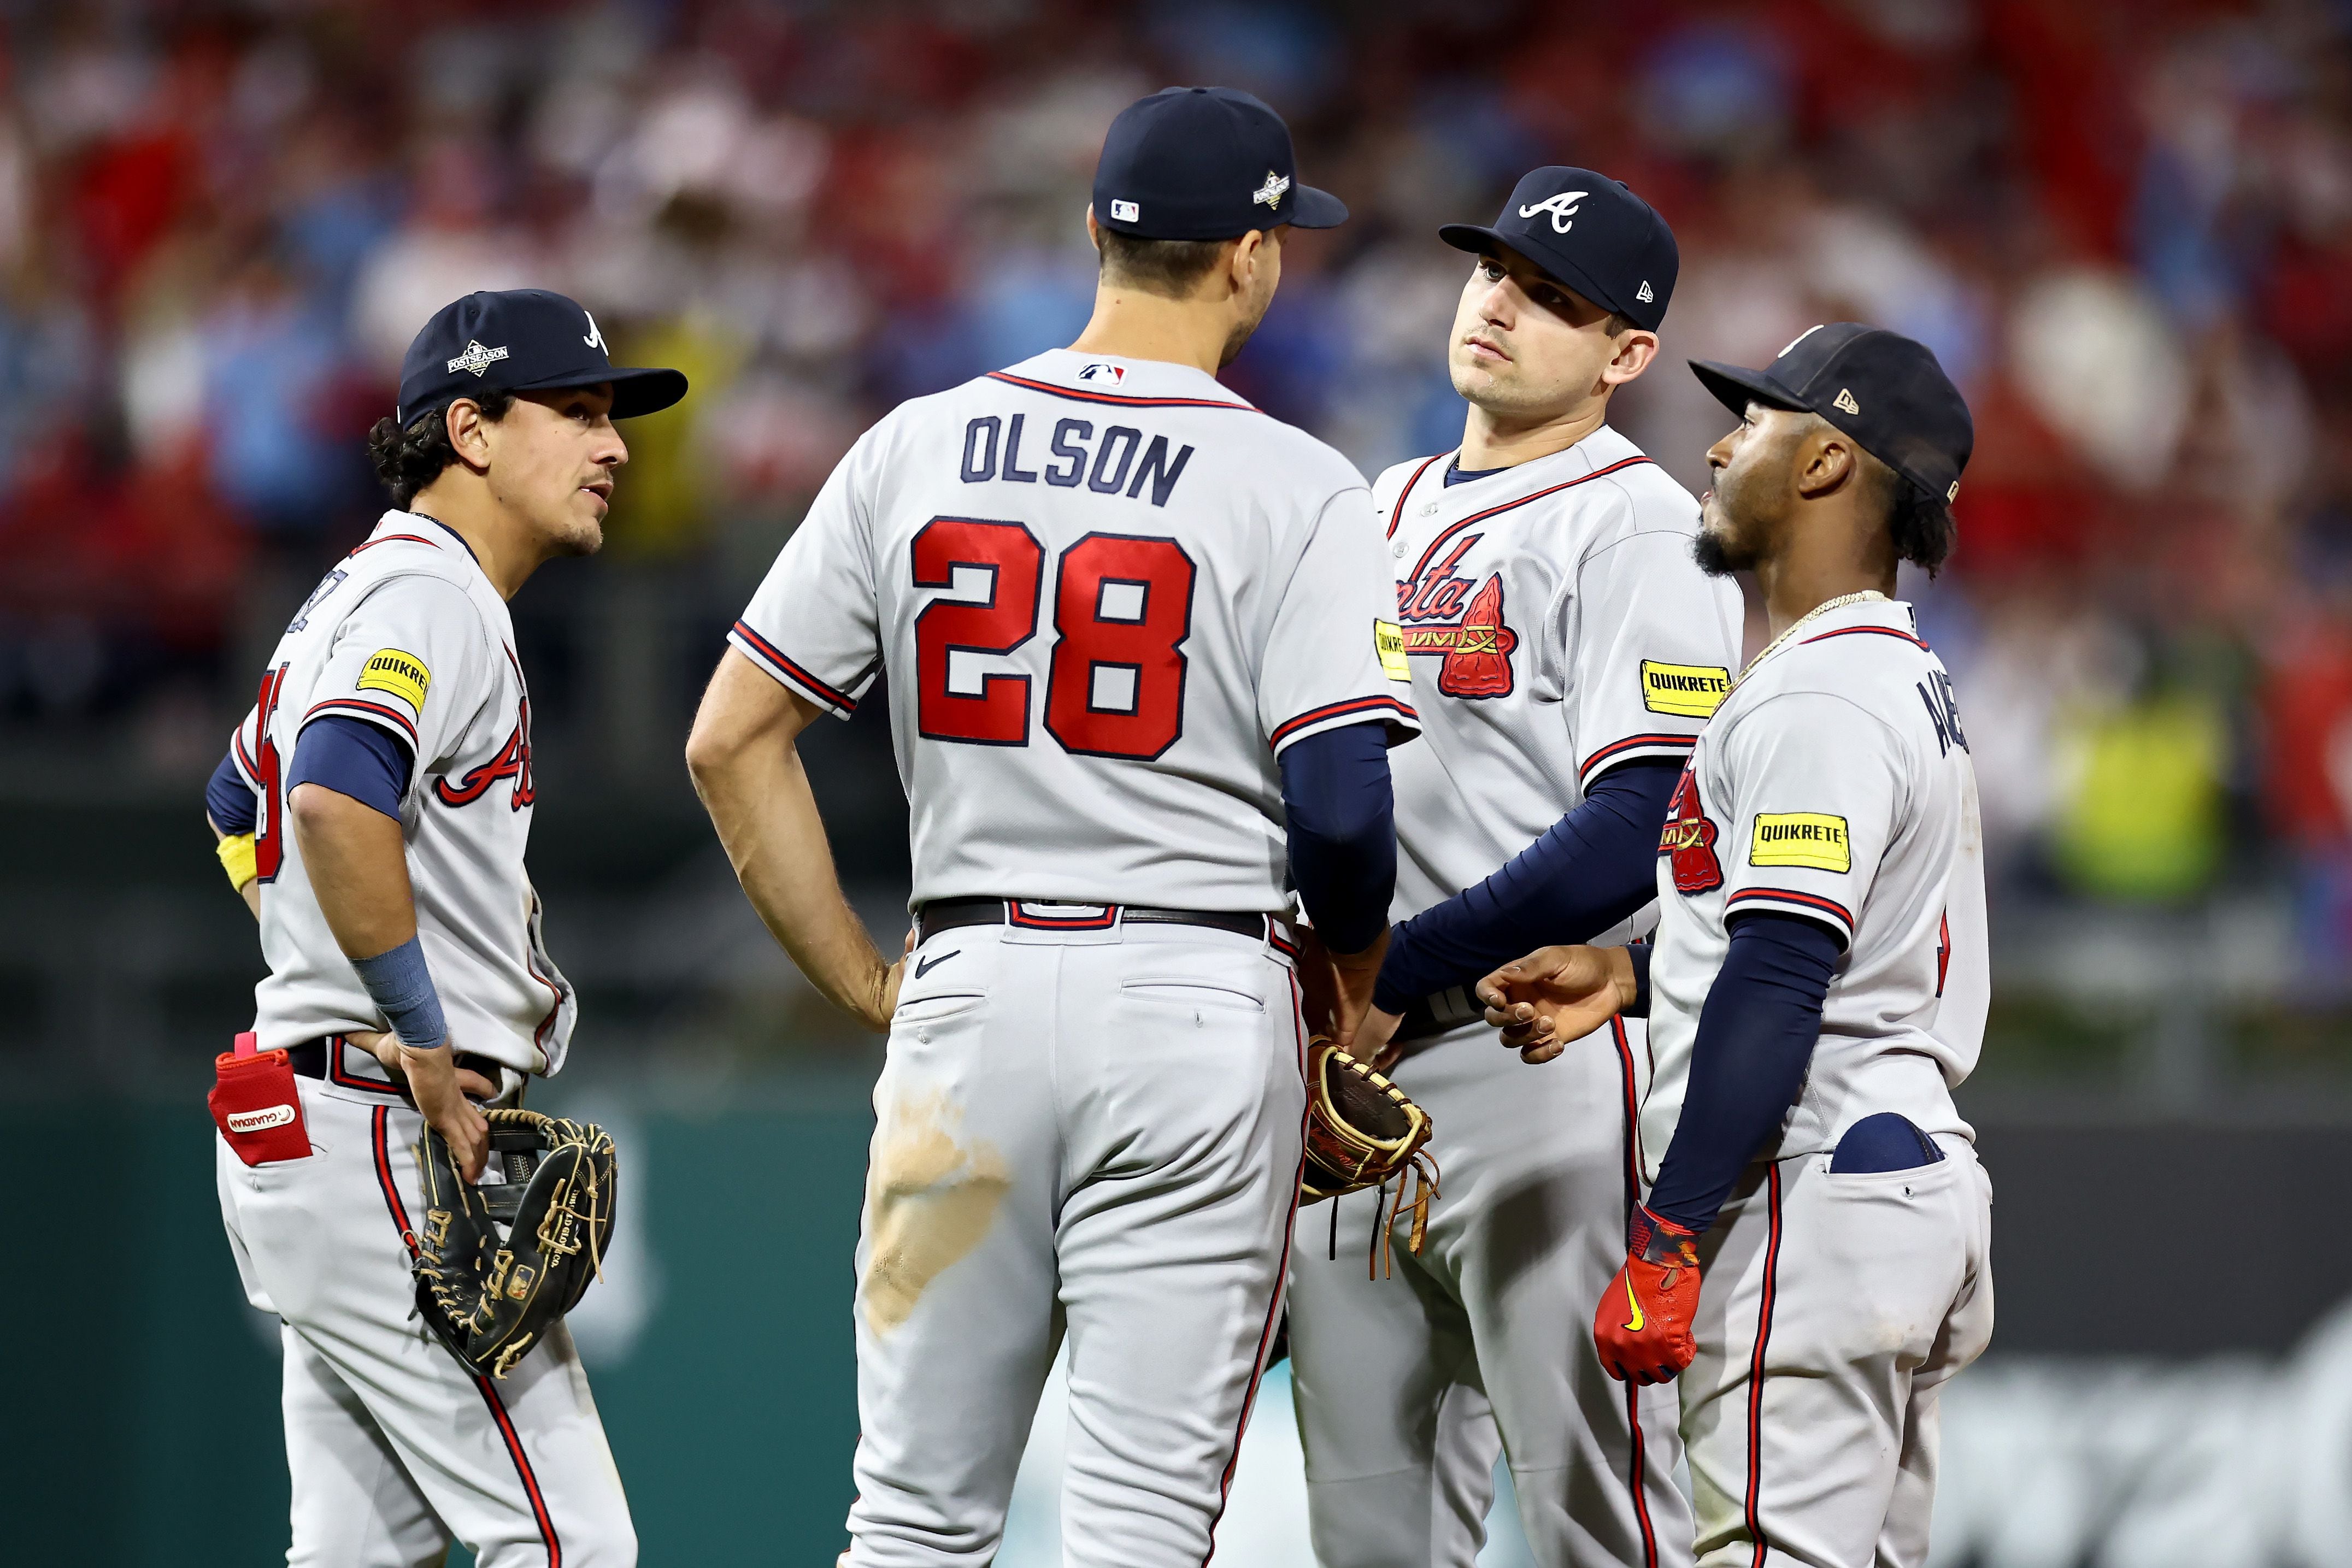 Braves' postseason ends in NLDS loss to Phillies for second year